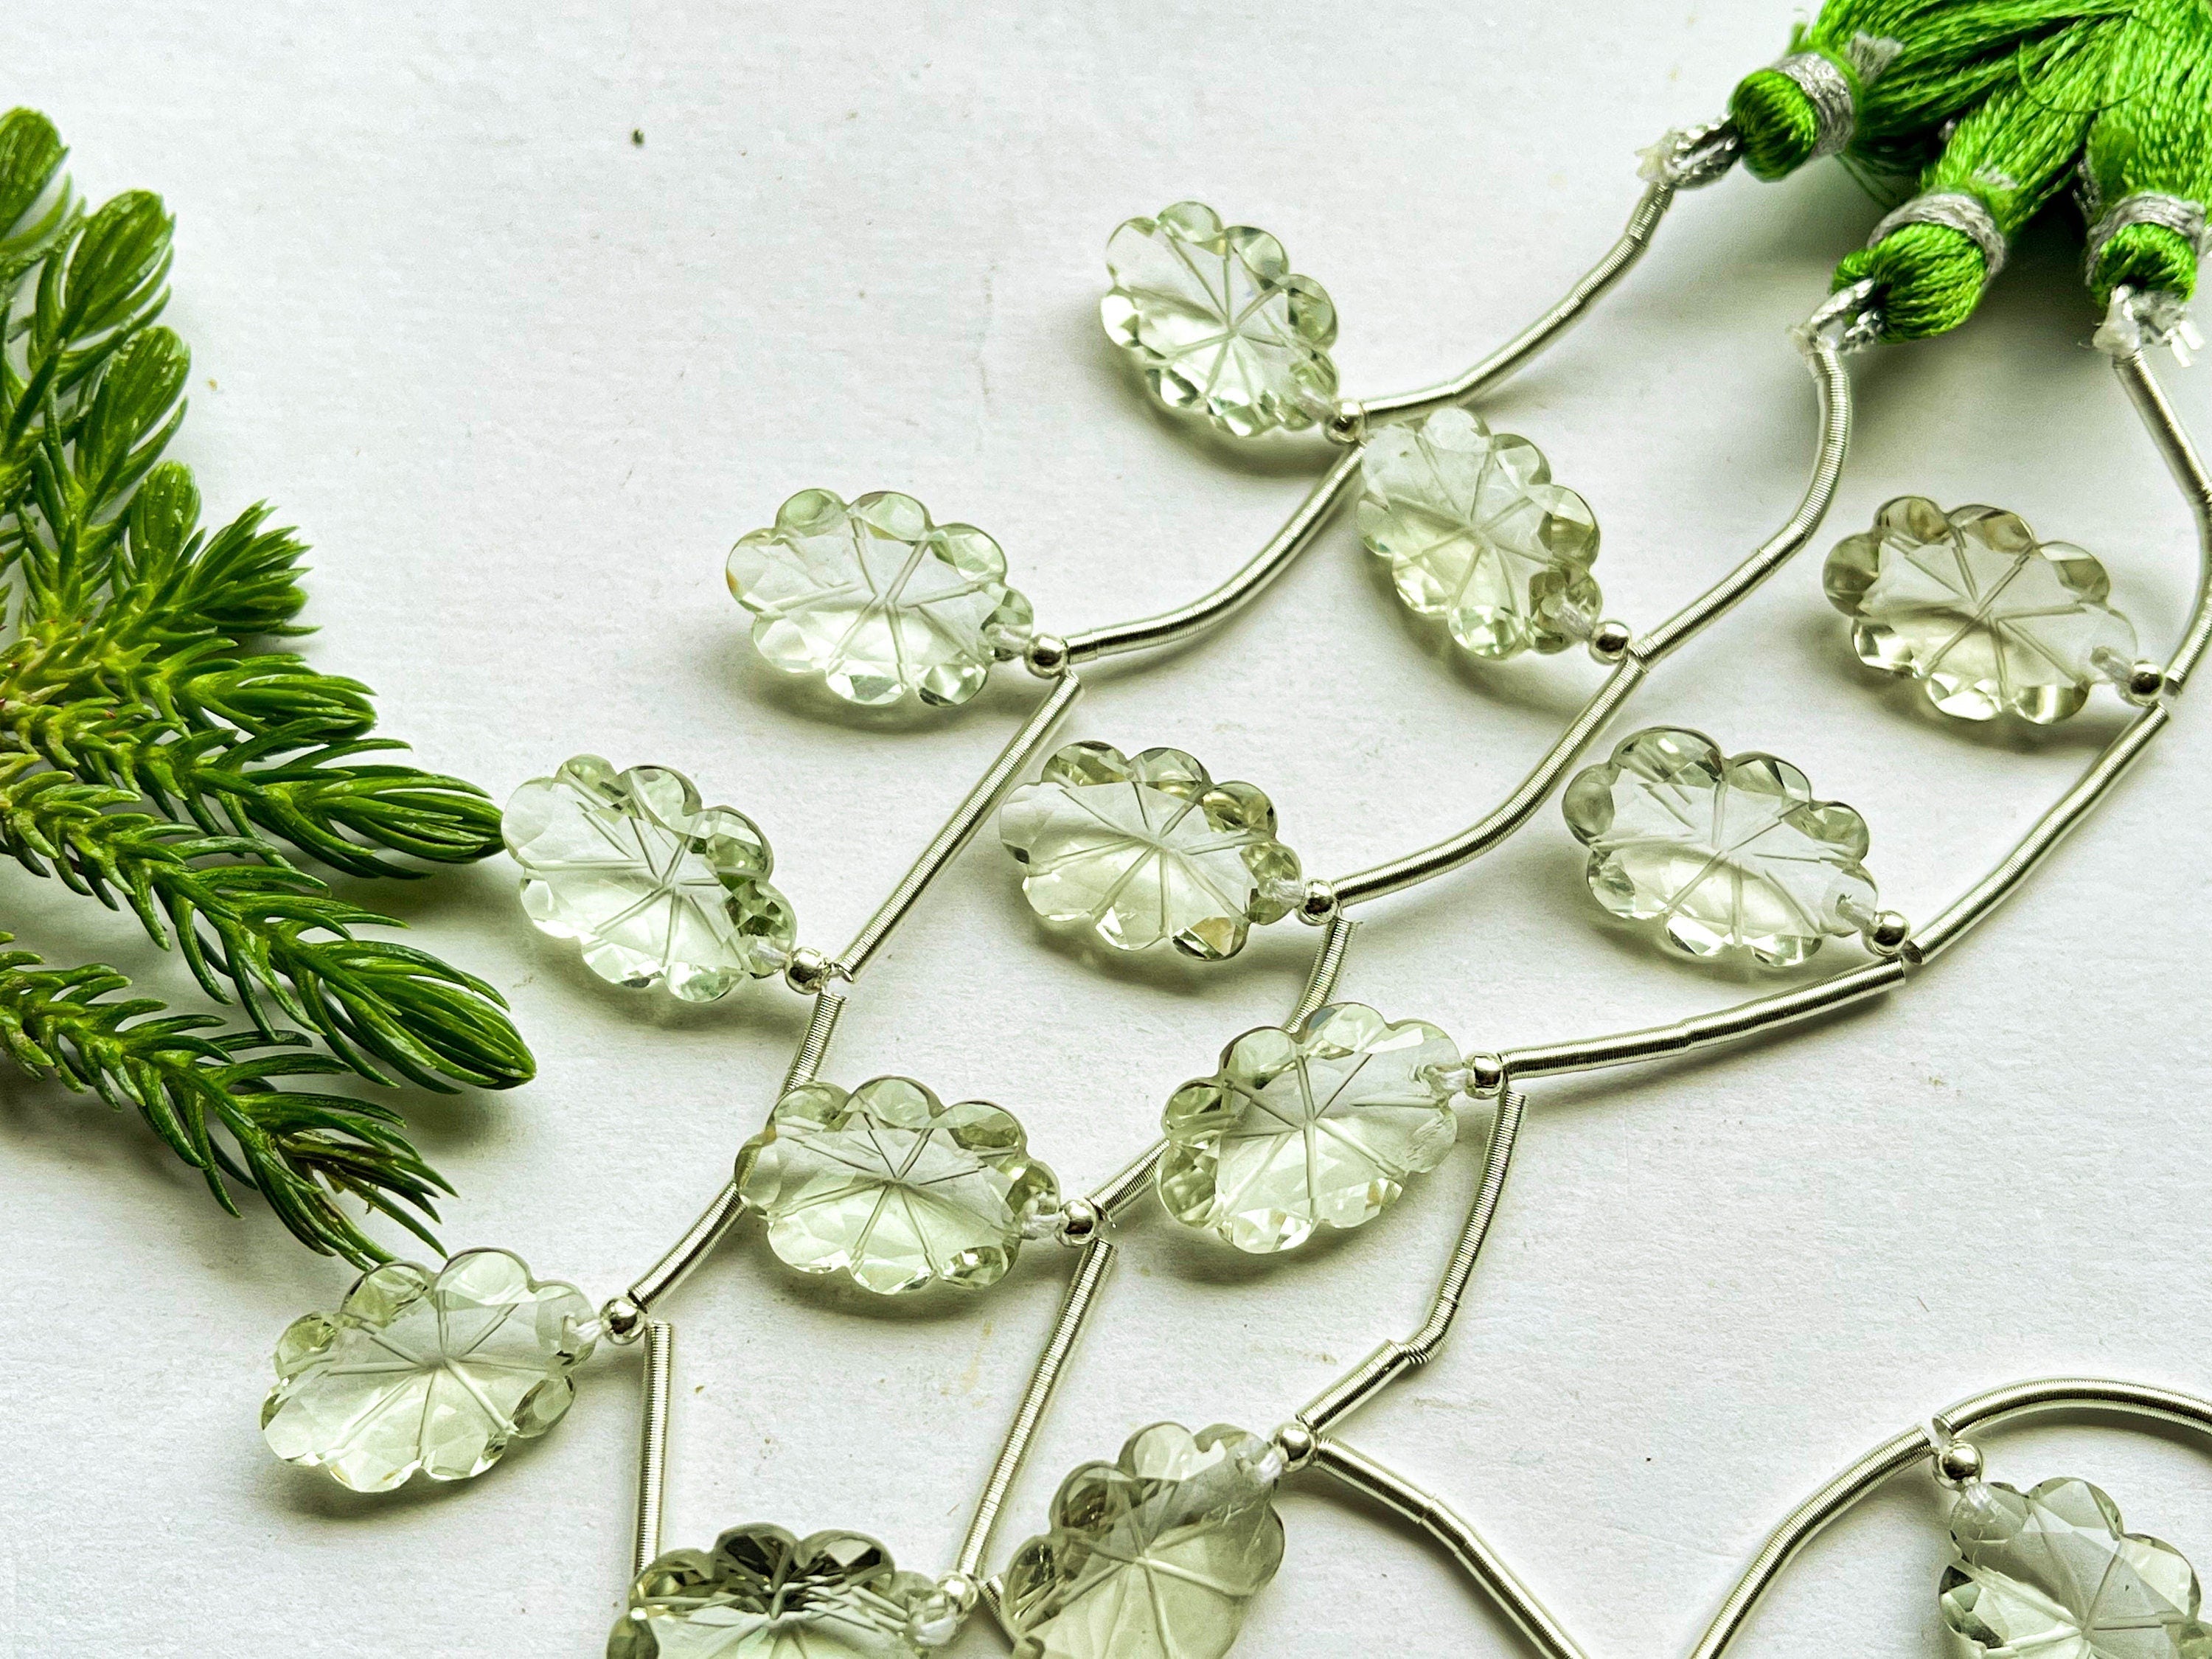 8 Pieces GREEN AMETHYST Laser Flower Carving Beads, Green Amethyst Flower Carving, Green Amethyst Carving Beads, Green Amethyst Beads Beadsforyourjewelry